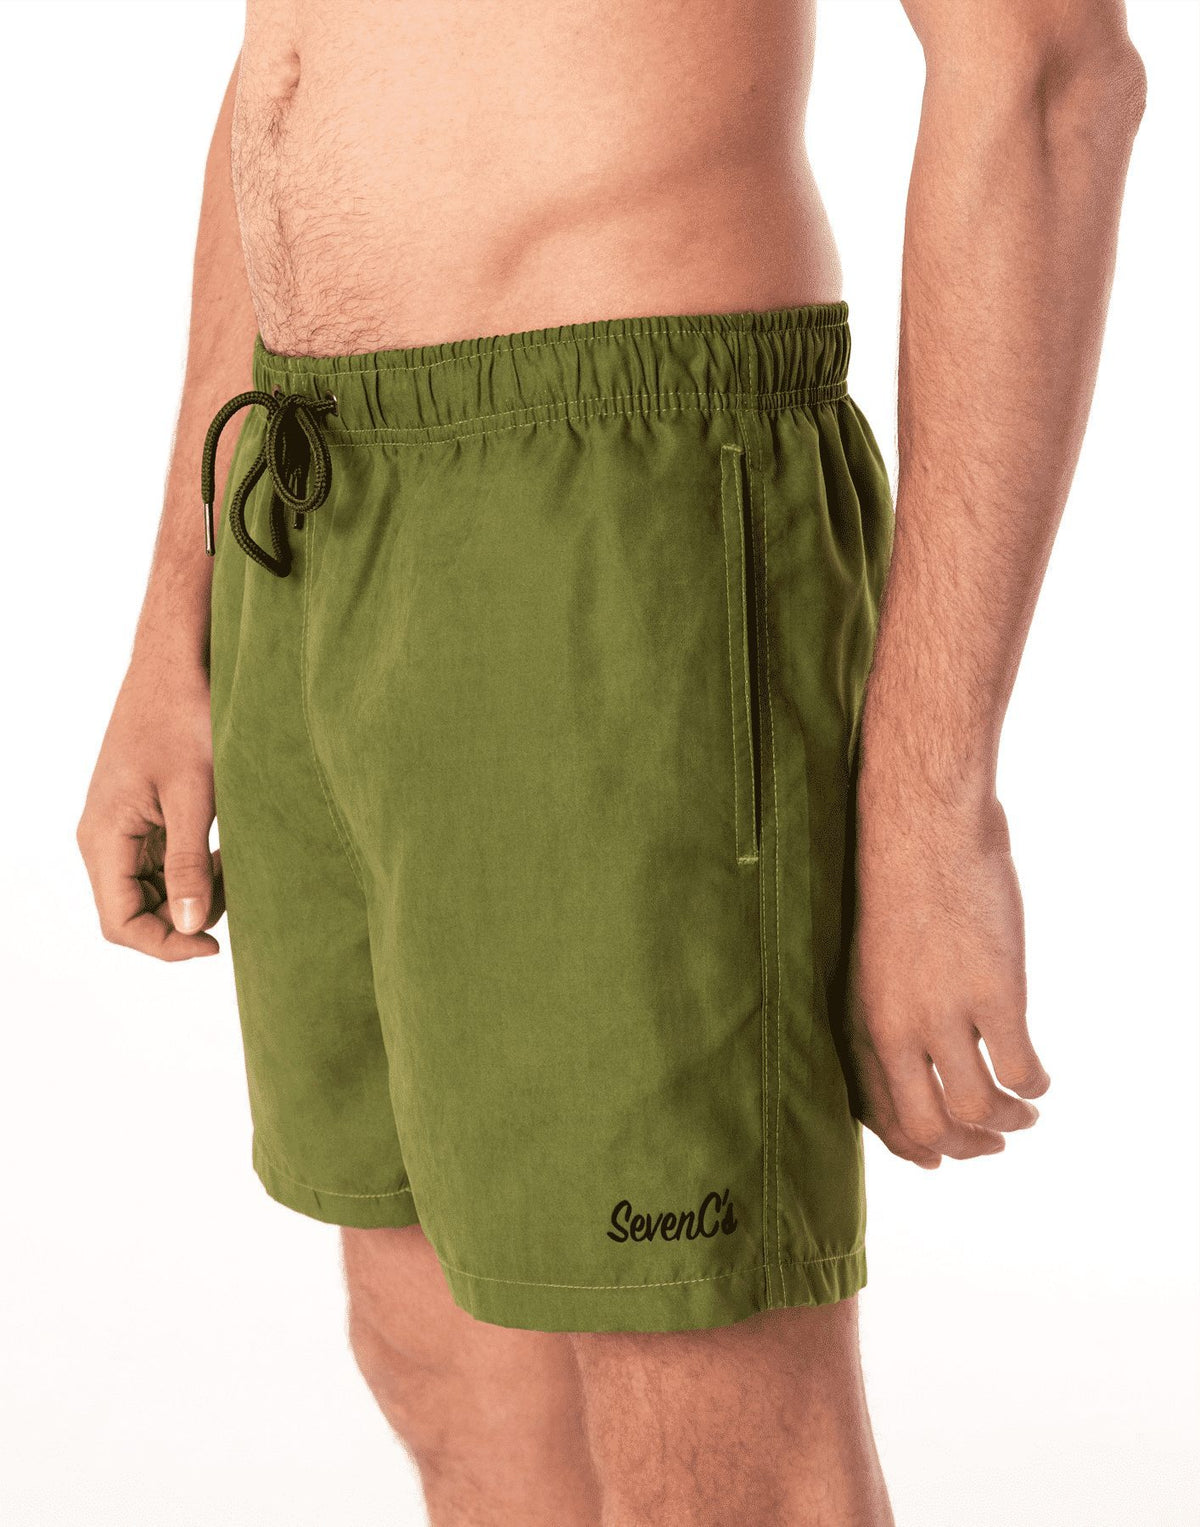 Eco-Friendly Olive Men's Shorts by SevenC's - Side View